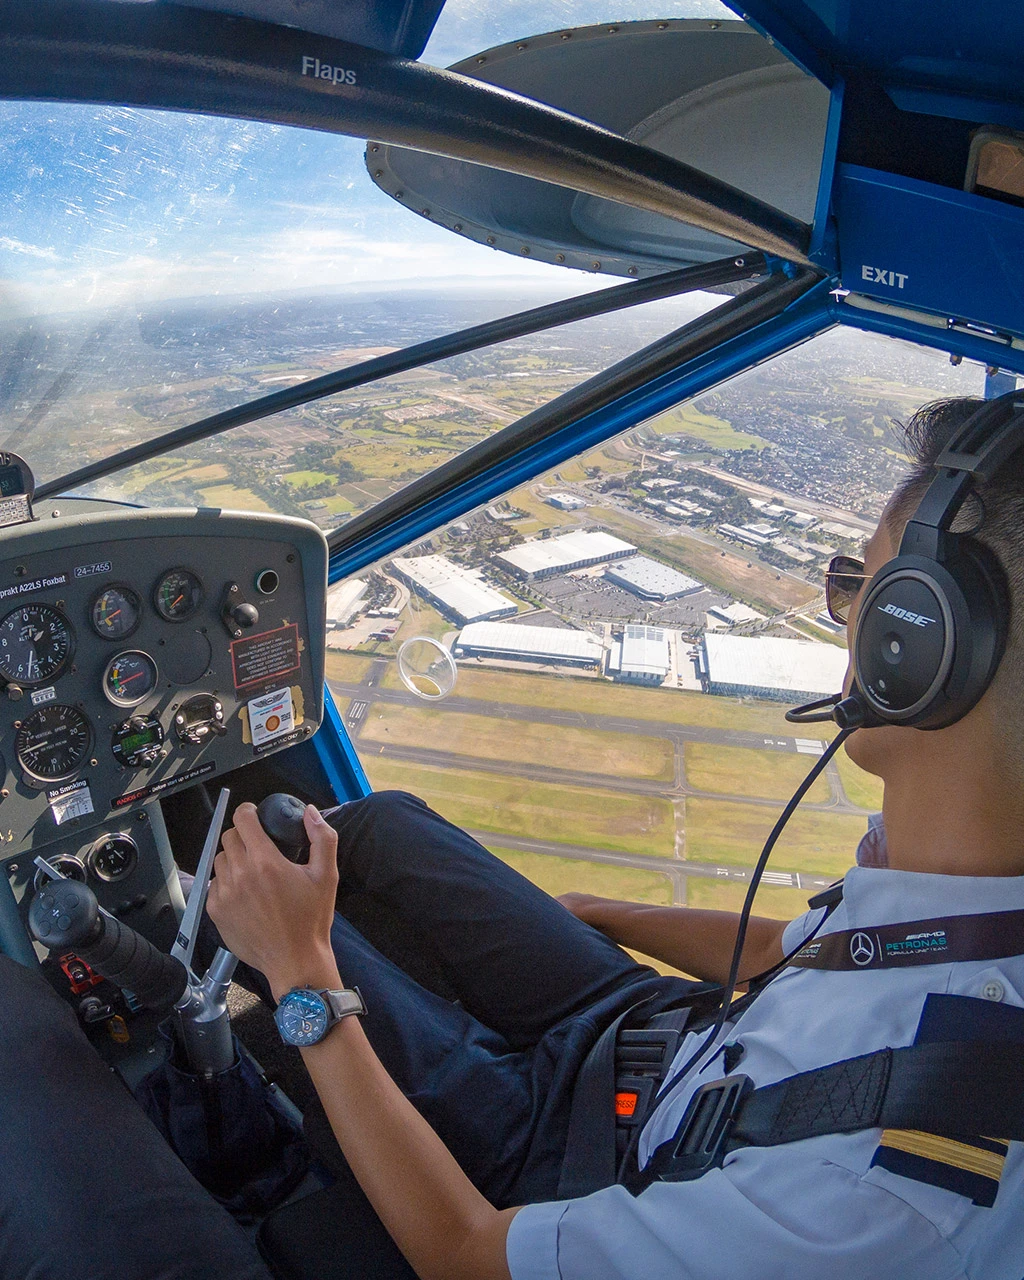 Maximise Your Time In The Sky With These Top Flight Training Tips